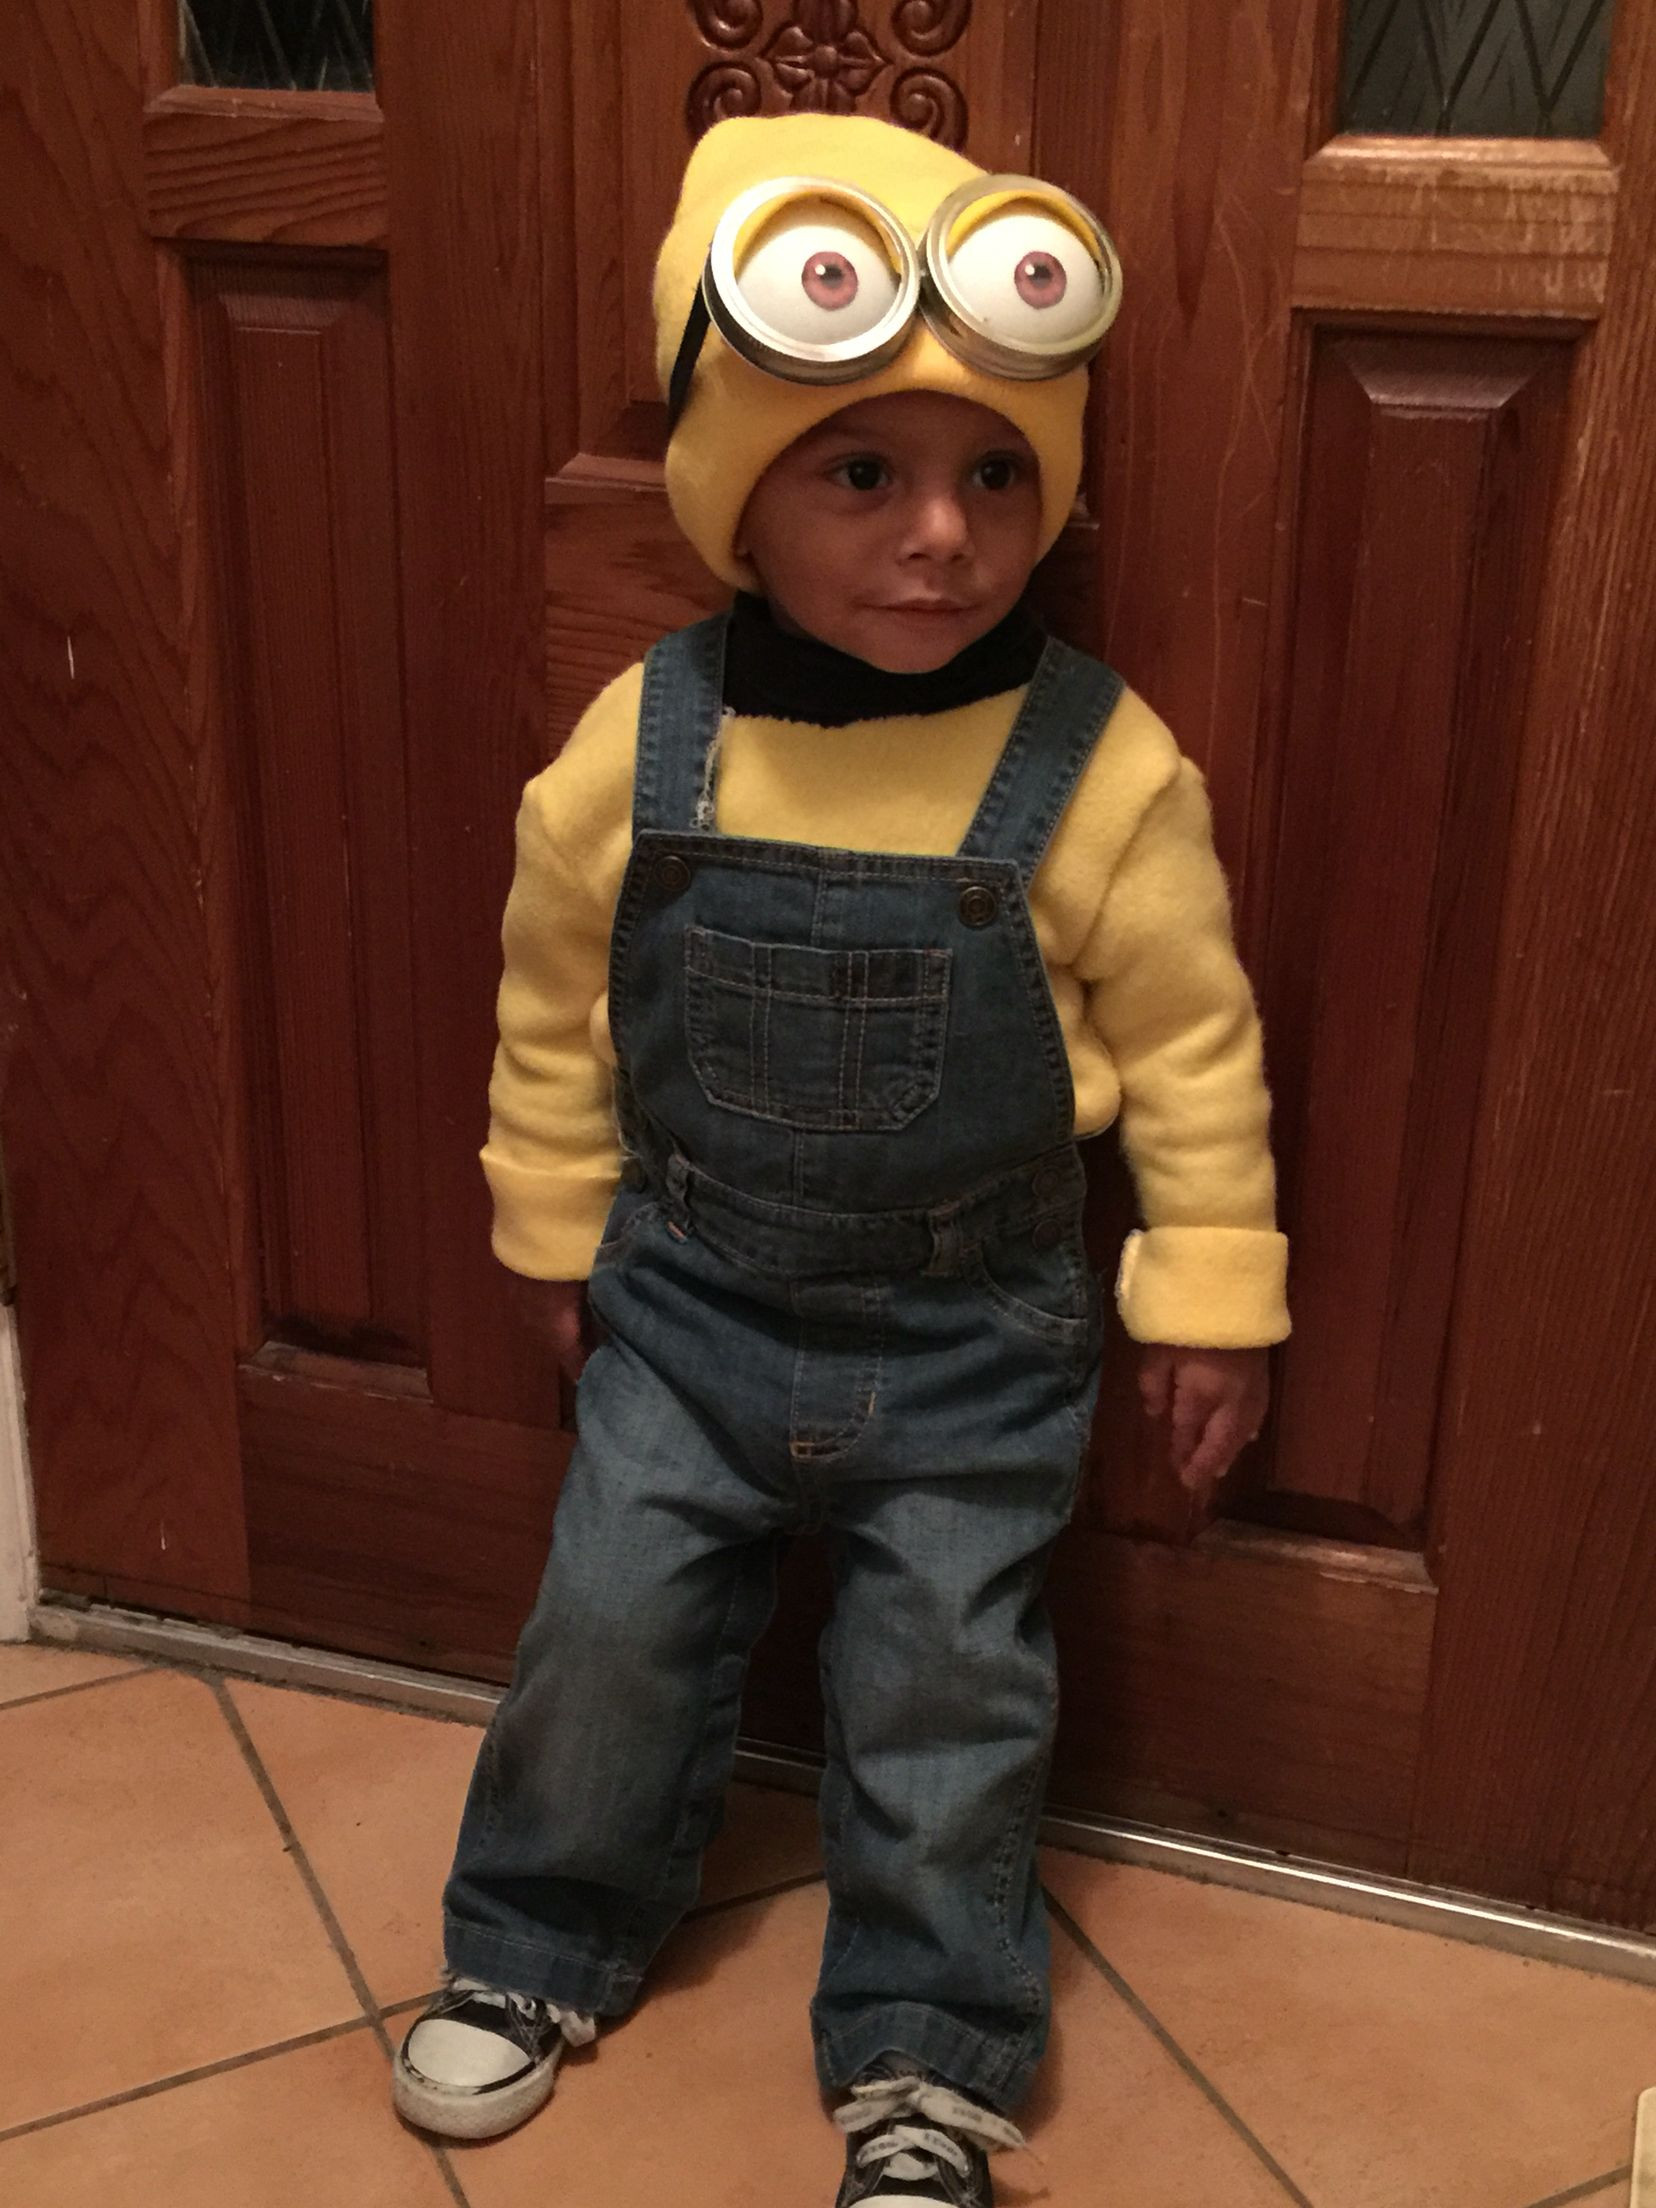 DIY Minion Costume For Toddler
 Toddler Minion costume